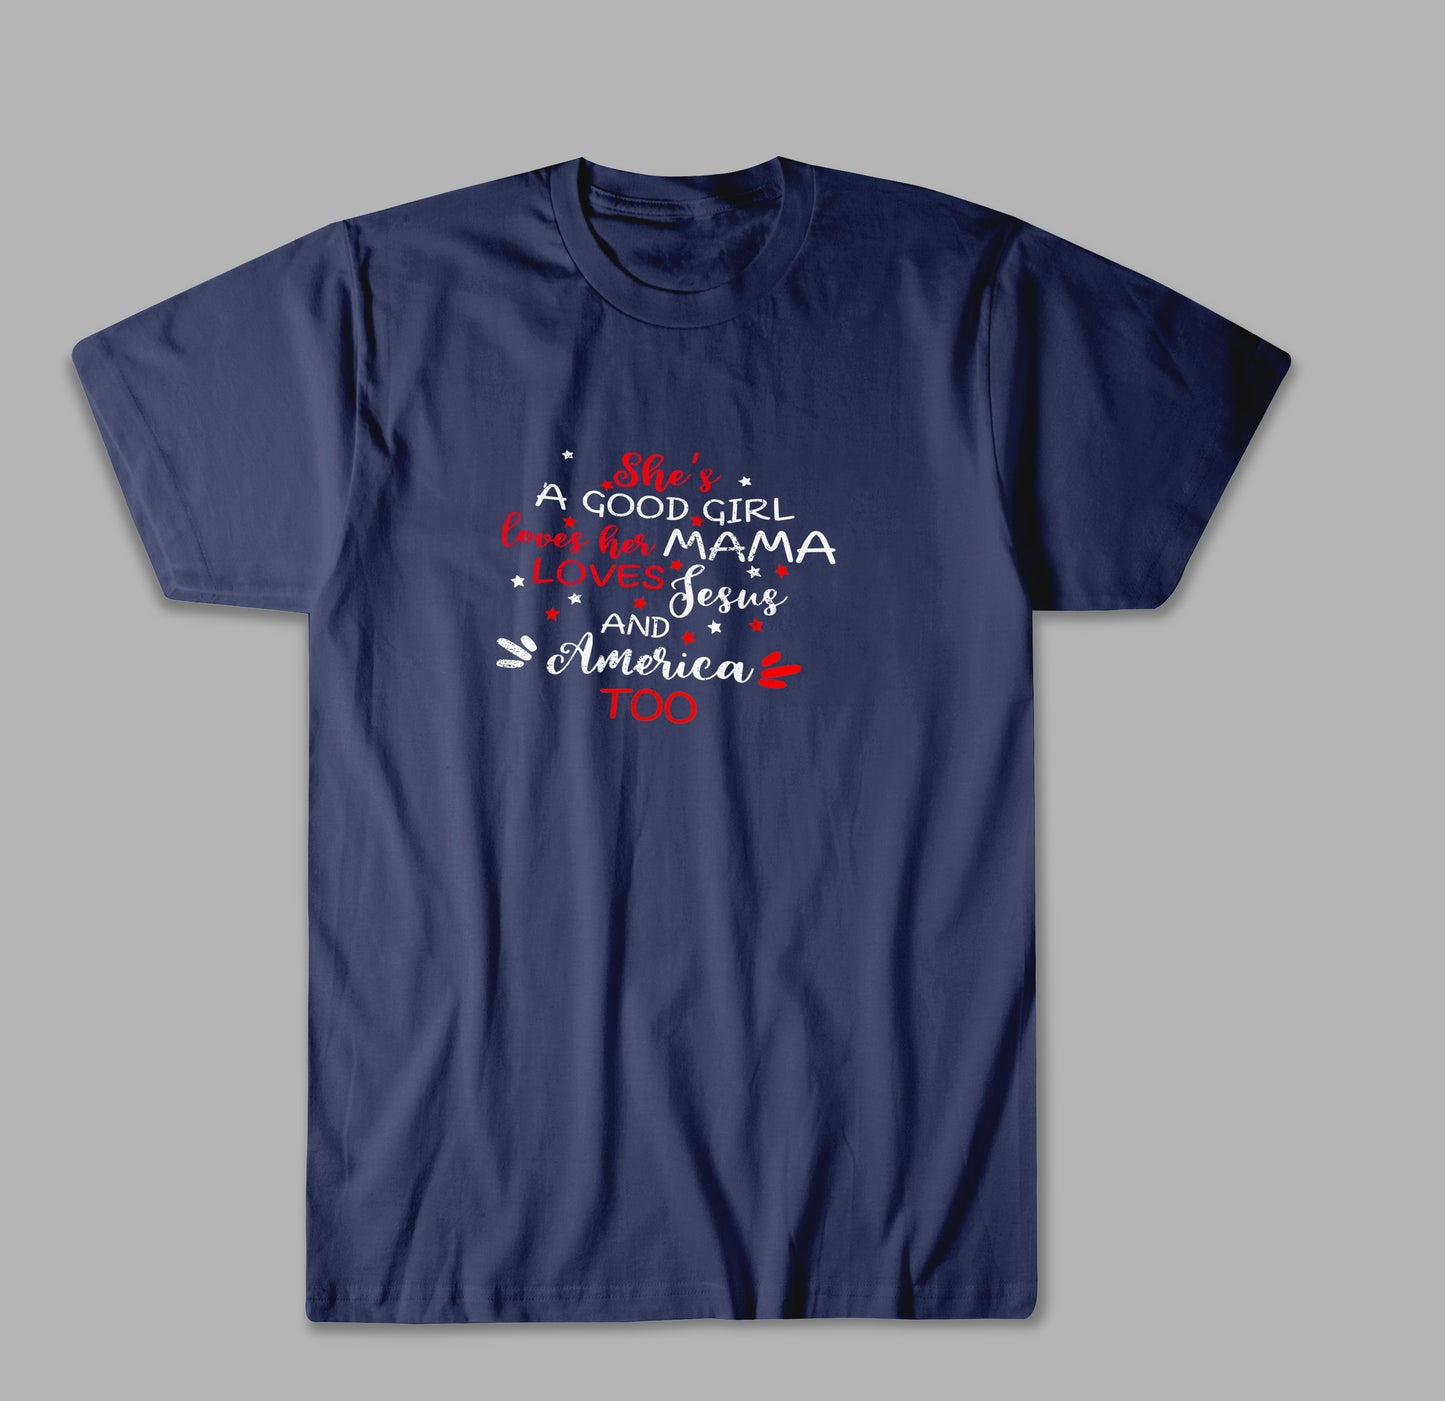 She's A Good Girl Loves Her Mama Loves Jesus and American T Shirt PJ4